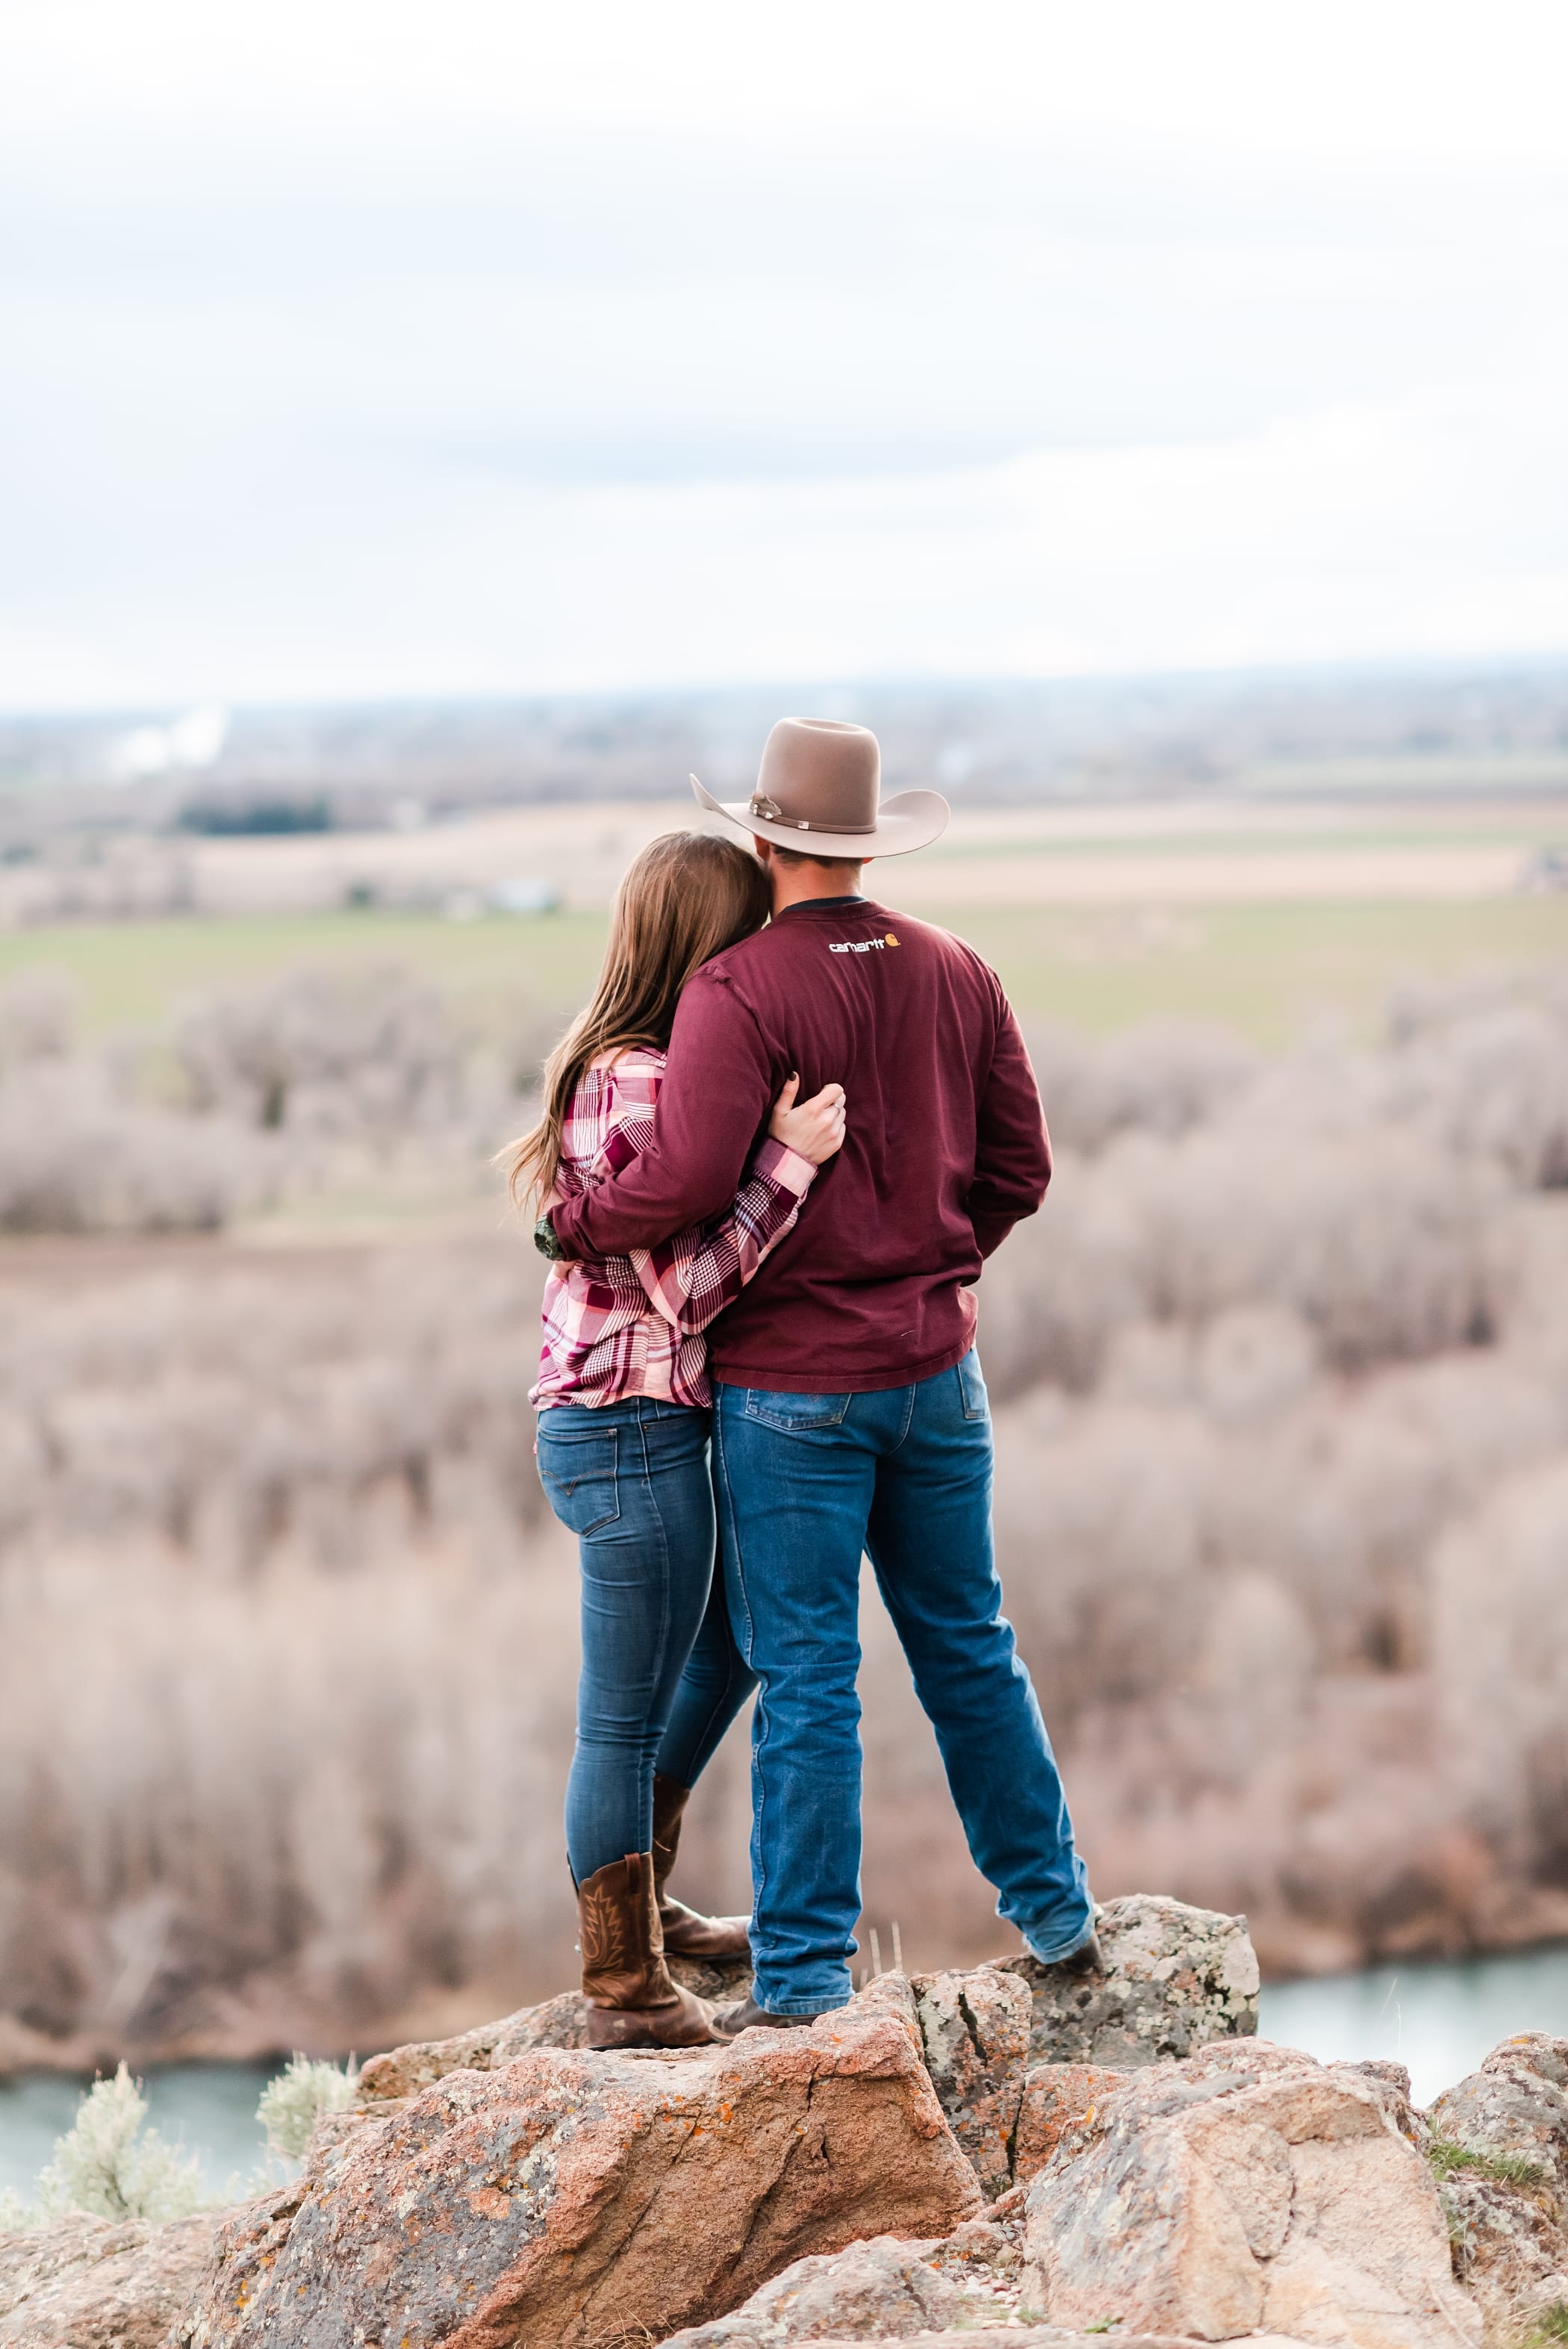 Rustic and country engagement session with cowboy hat and open field